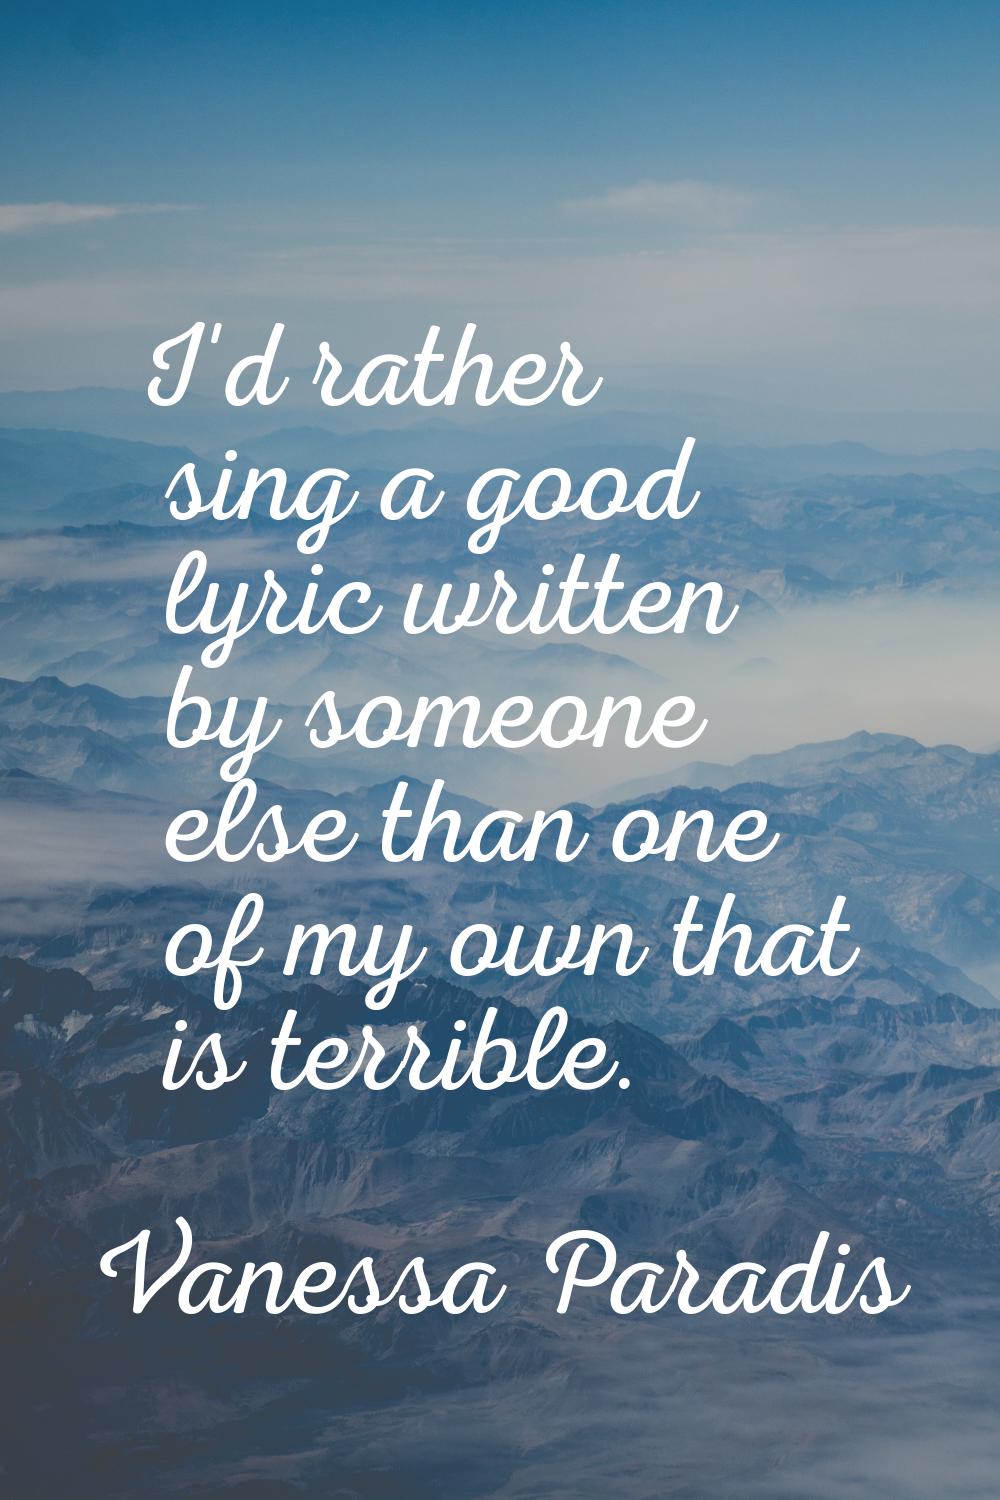 I'd rather sing a good lyric written by someone else than one of my own that is terrible.